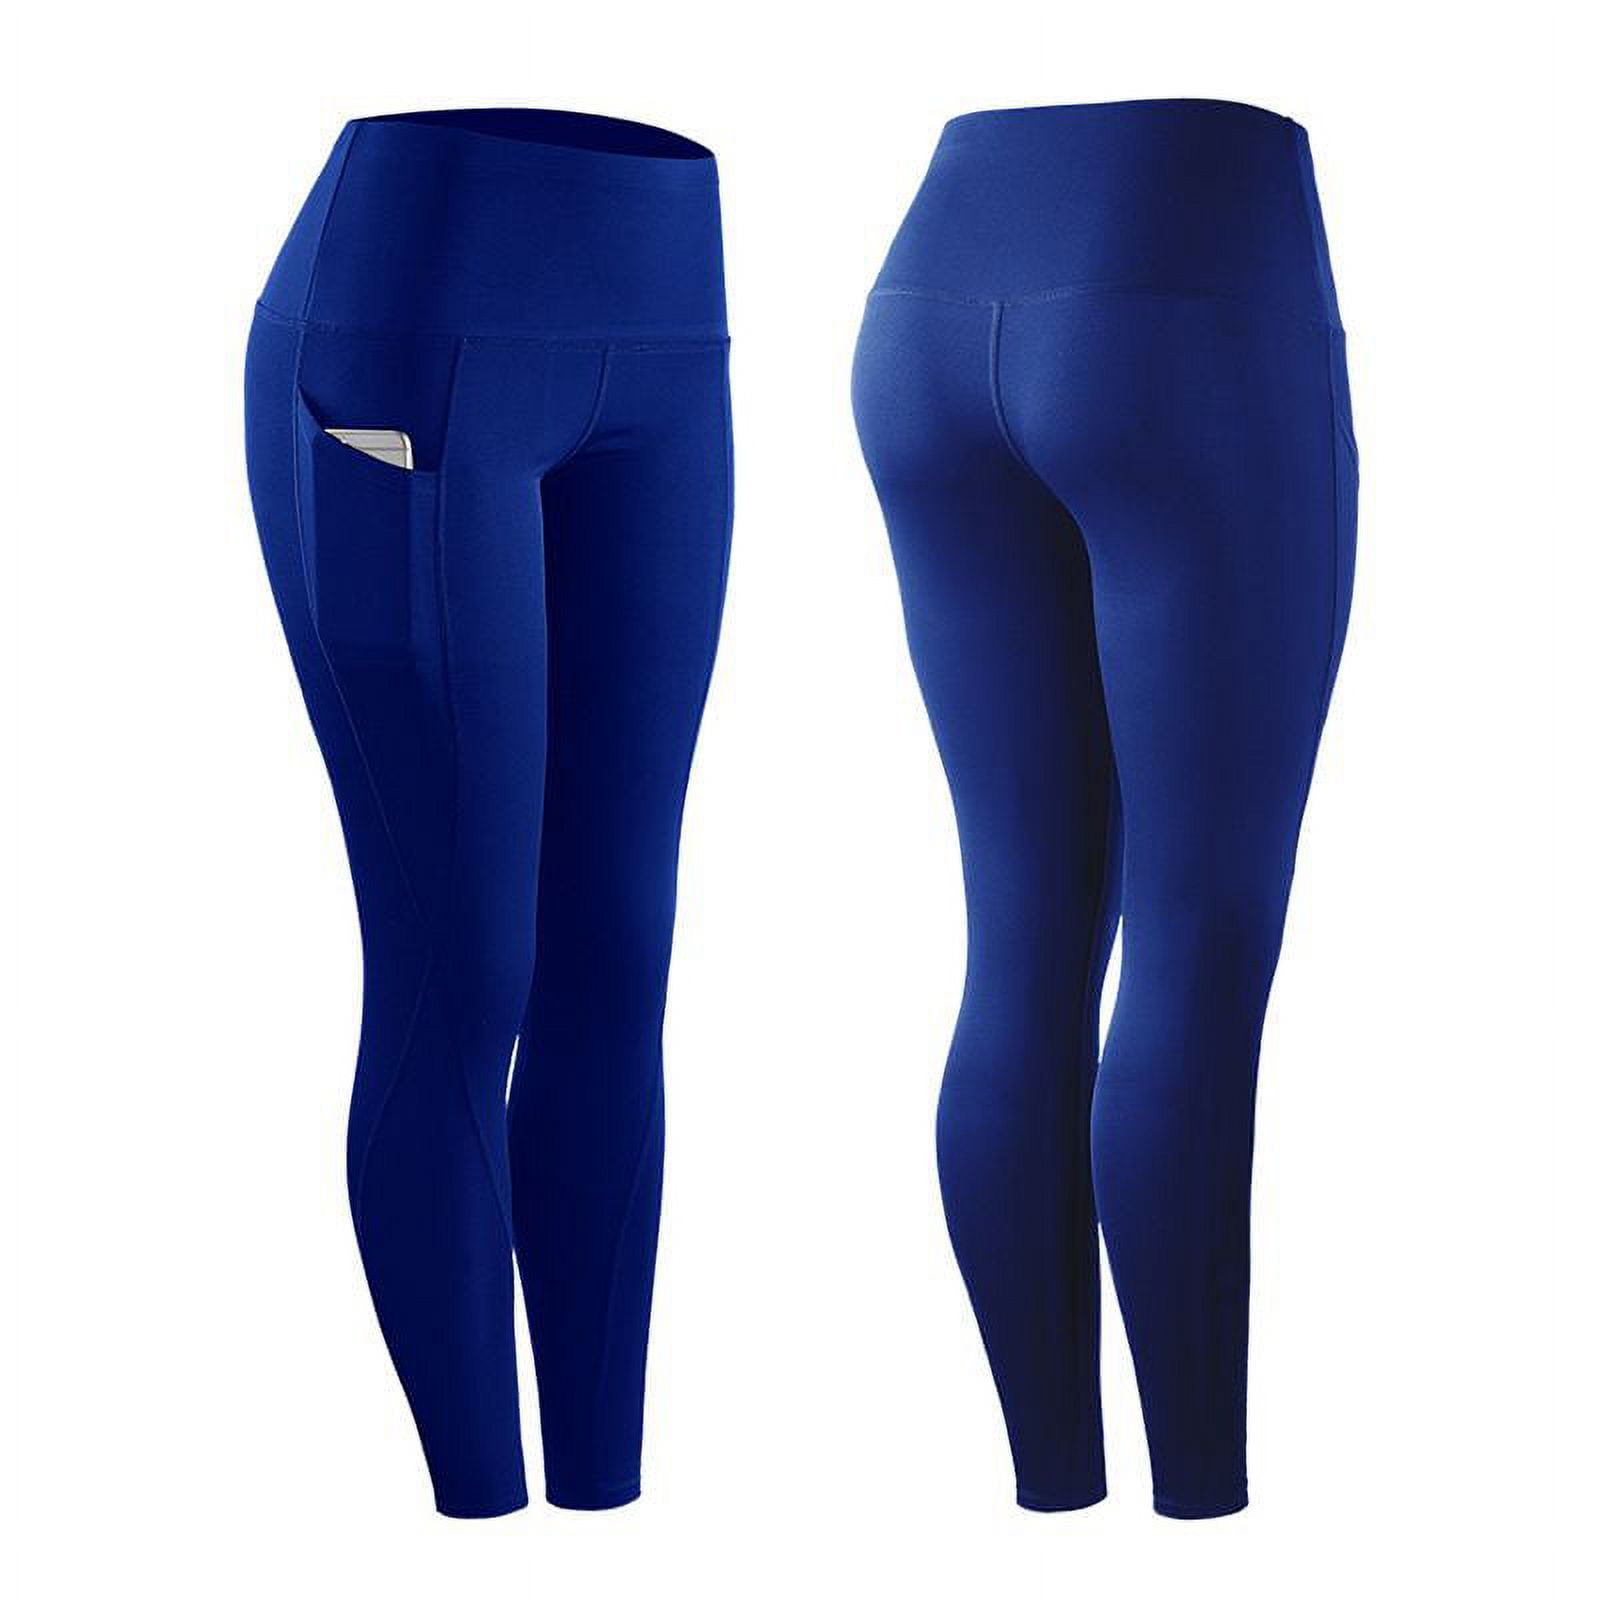 High Waisted Leggings for Women- 4 Colors - Athletic Tummy Control